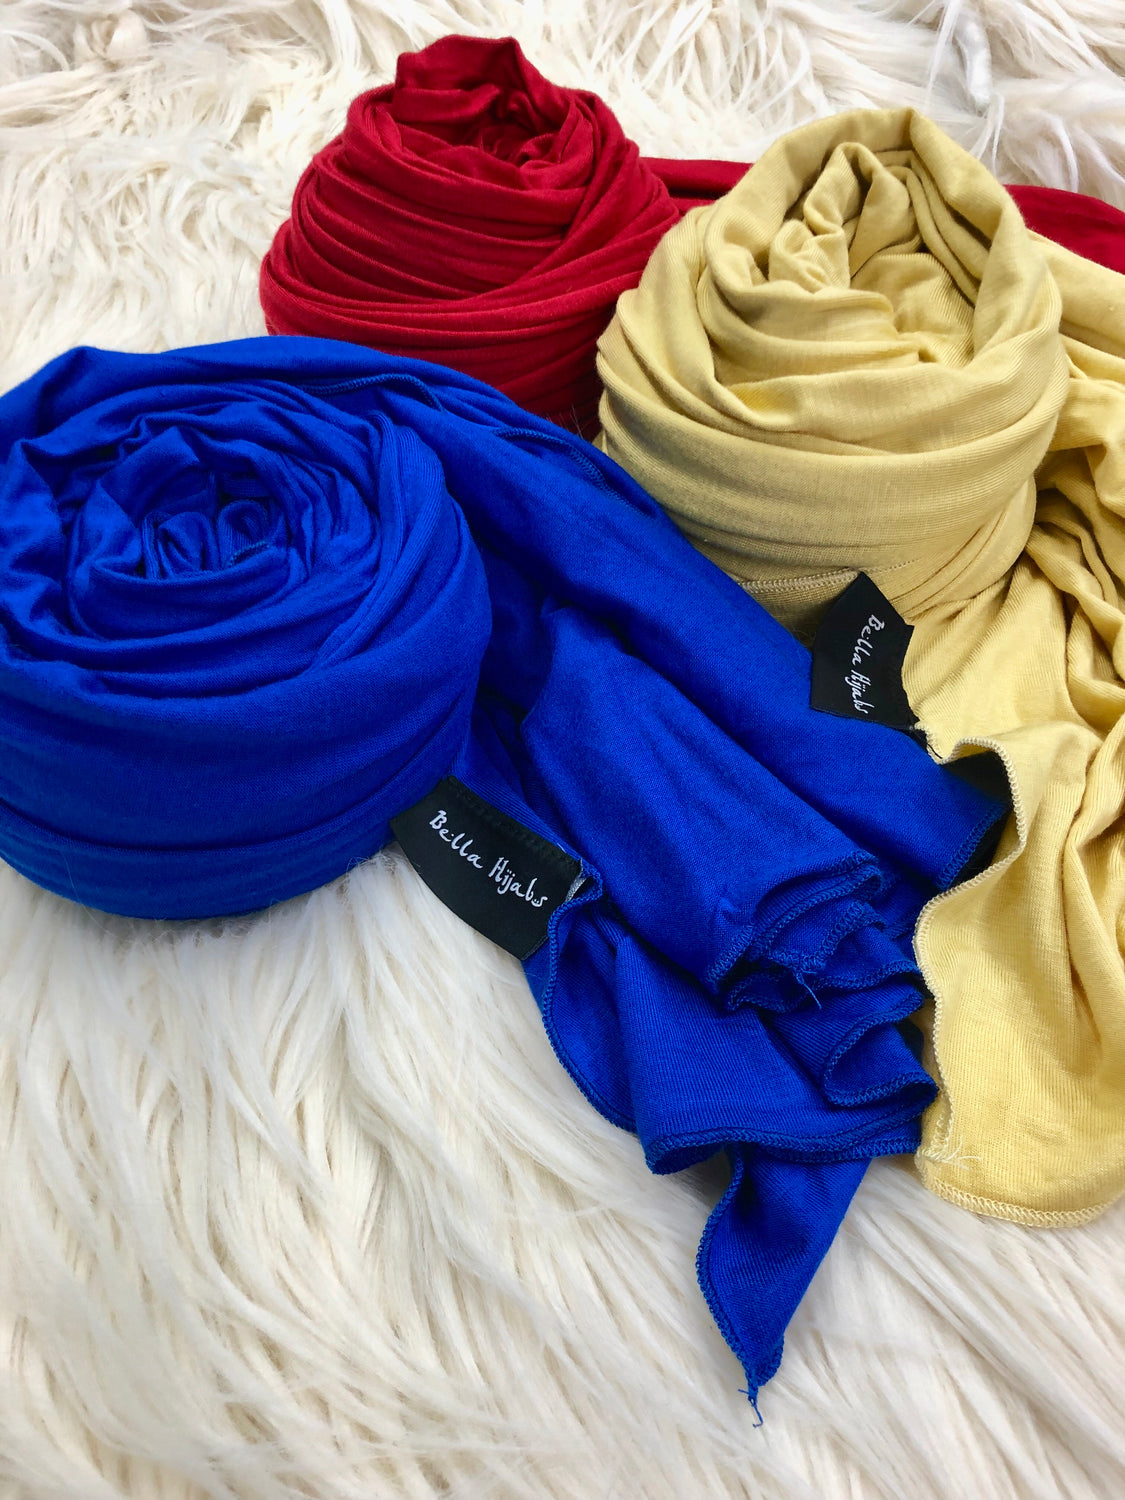 three jersey hijabs in primary colors red blue and yellow